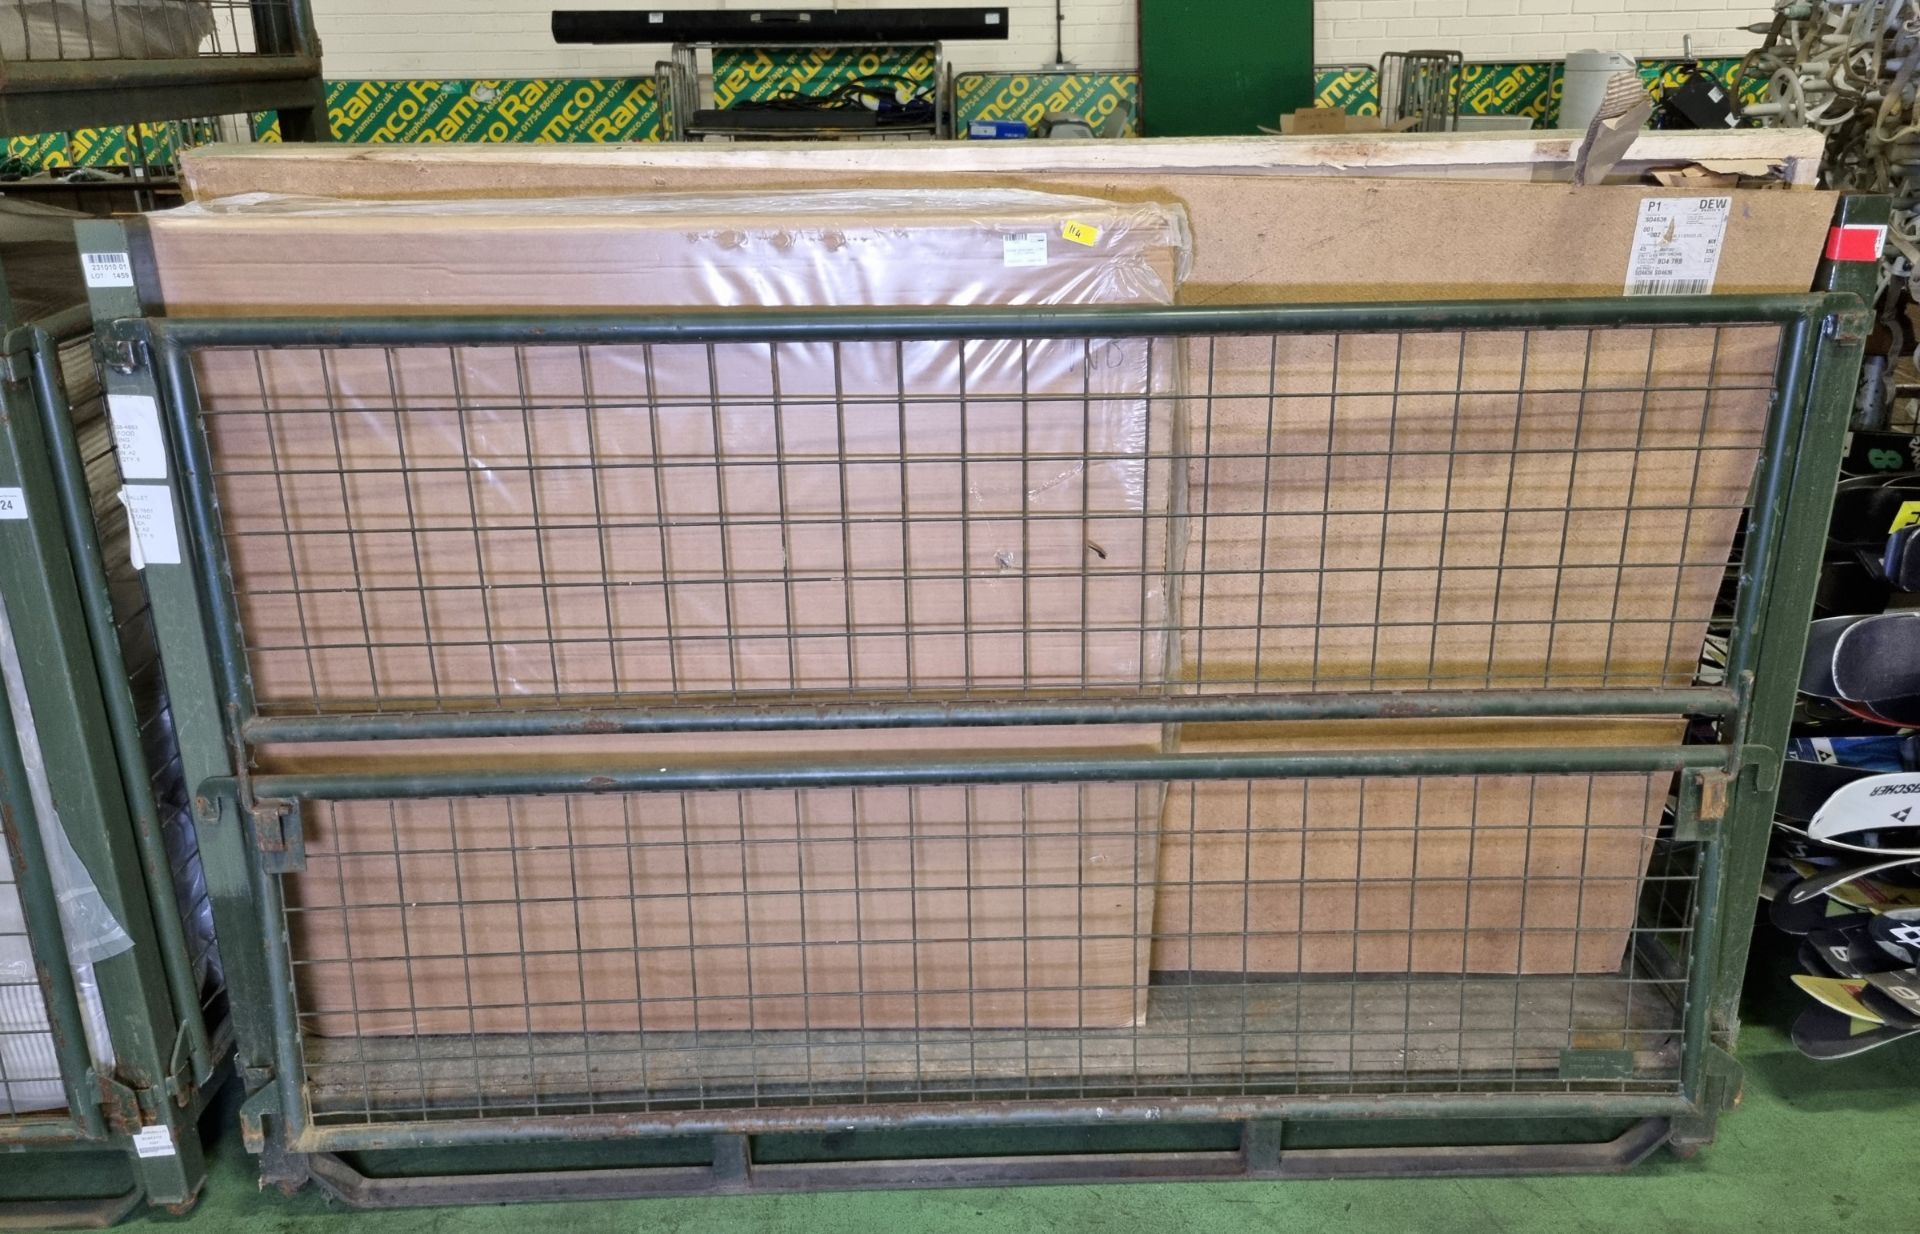 2x large notice boards - L1300 x D 20 x H 1200mm, 4x Drywipe whiteboards-see description for sizes